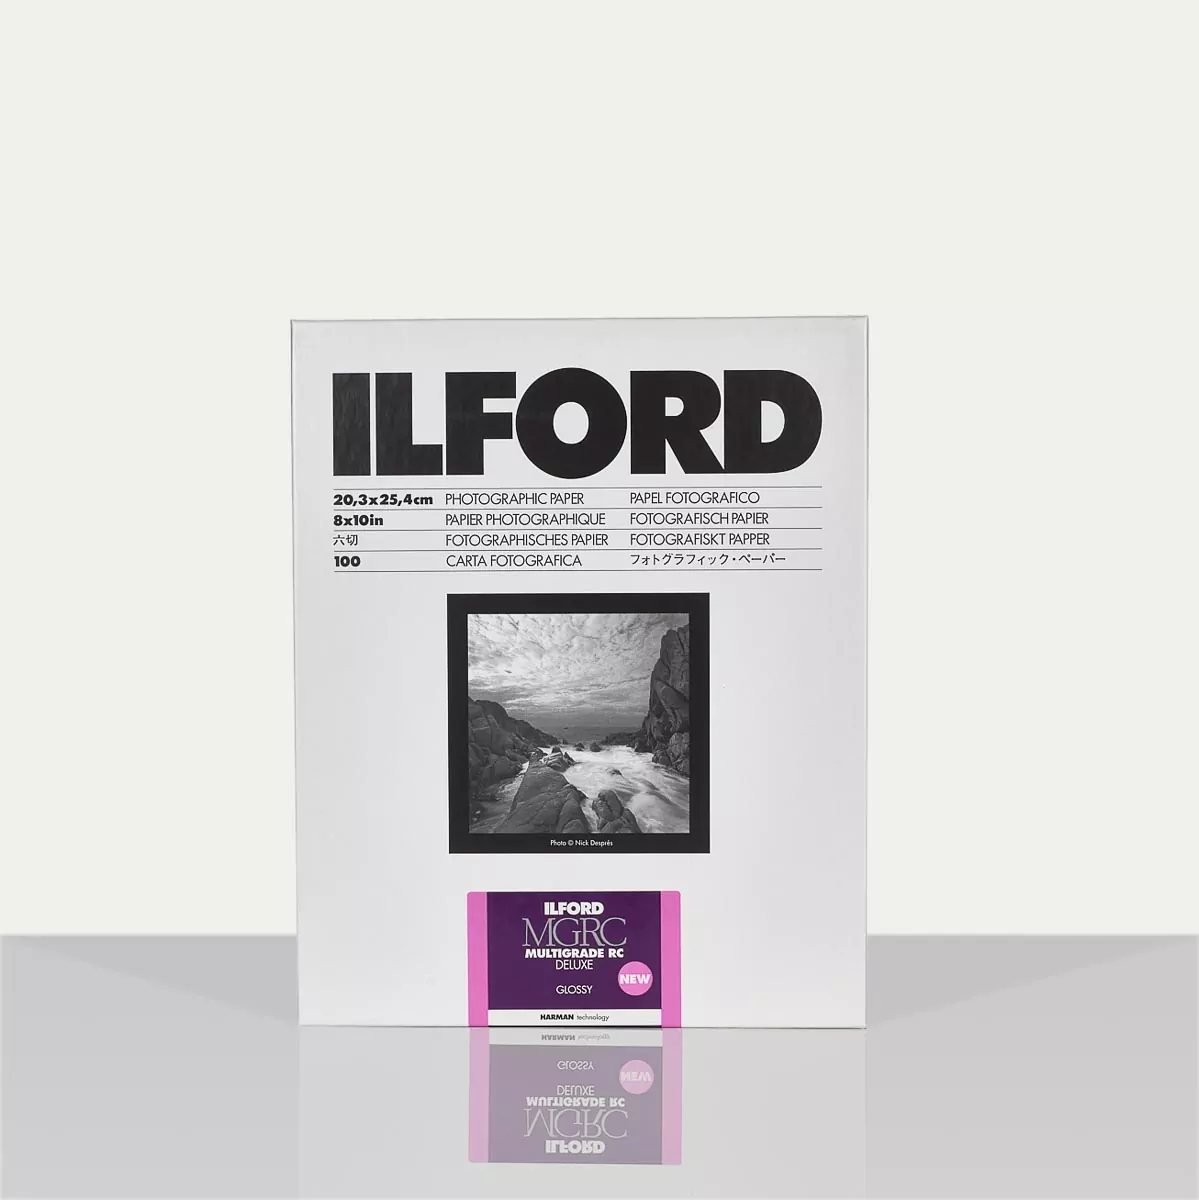 ILFORD MULTIGRADE RC DELUXE MGRCDL1M 20.3×25.4cm (100 sheets)